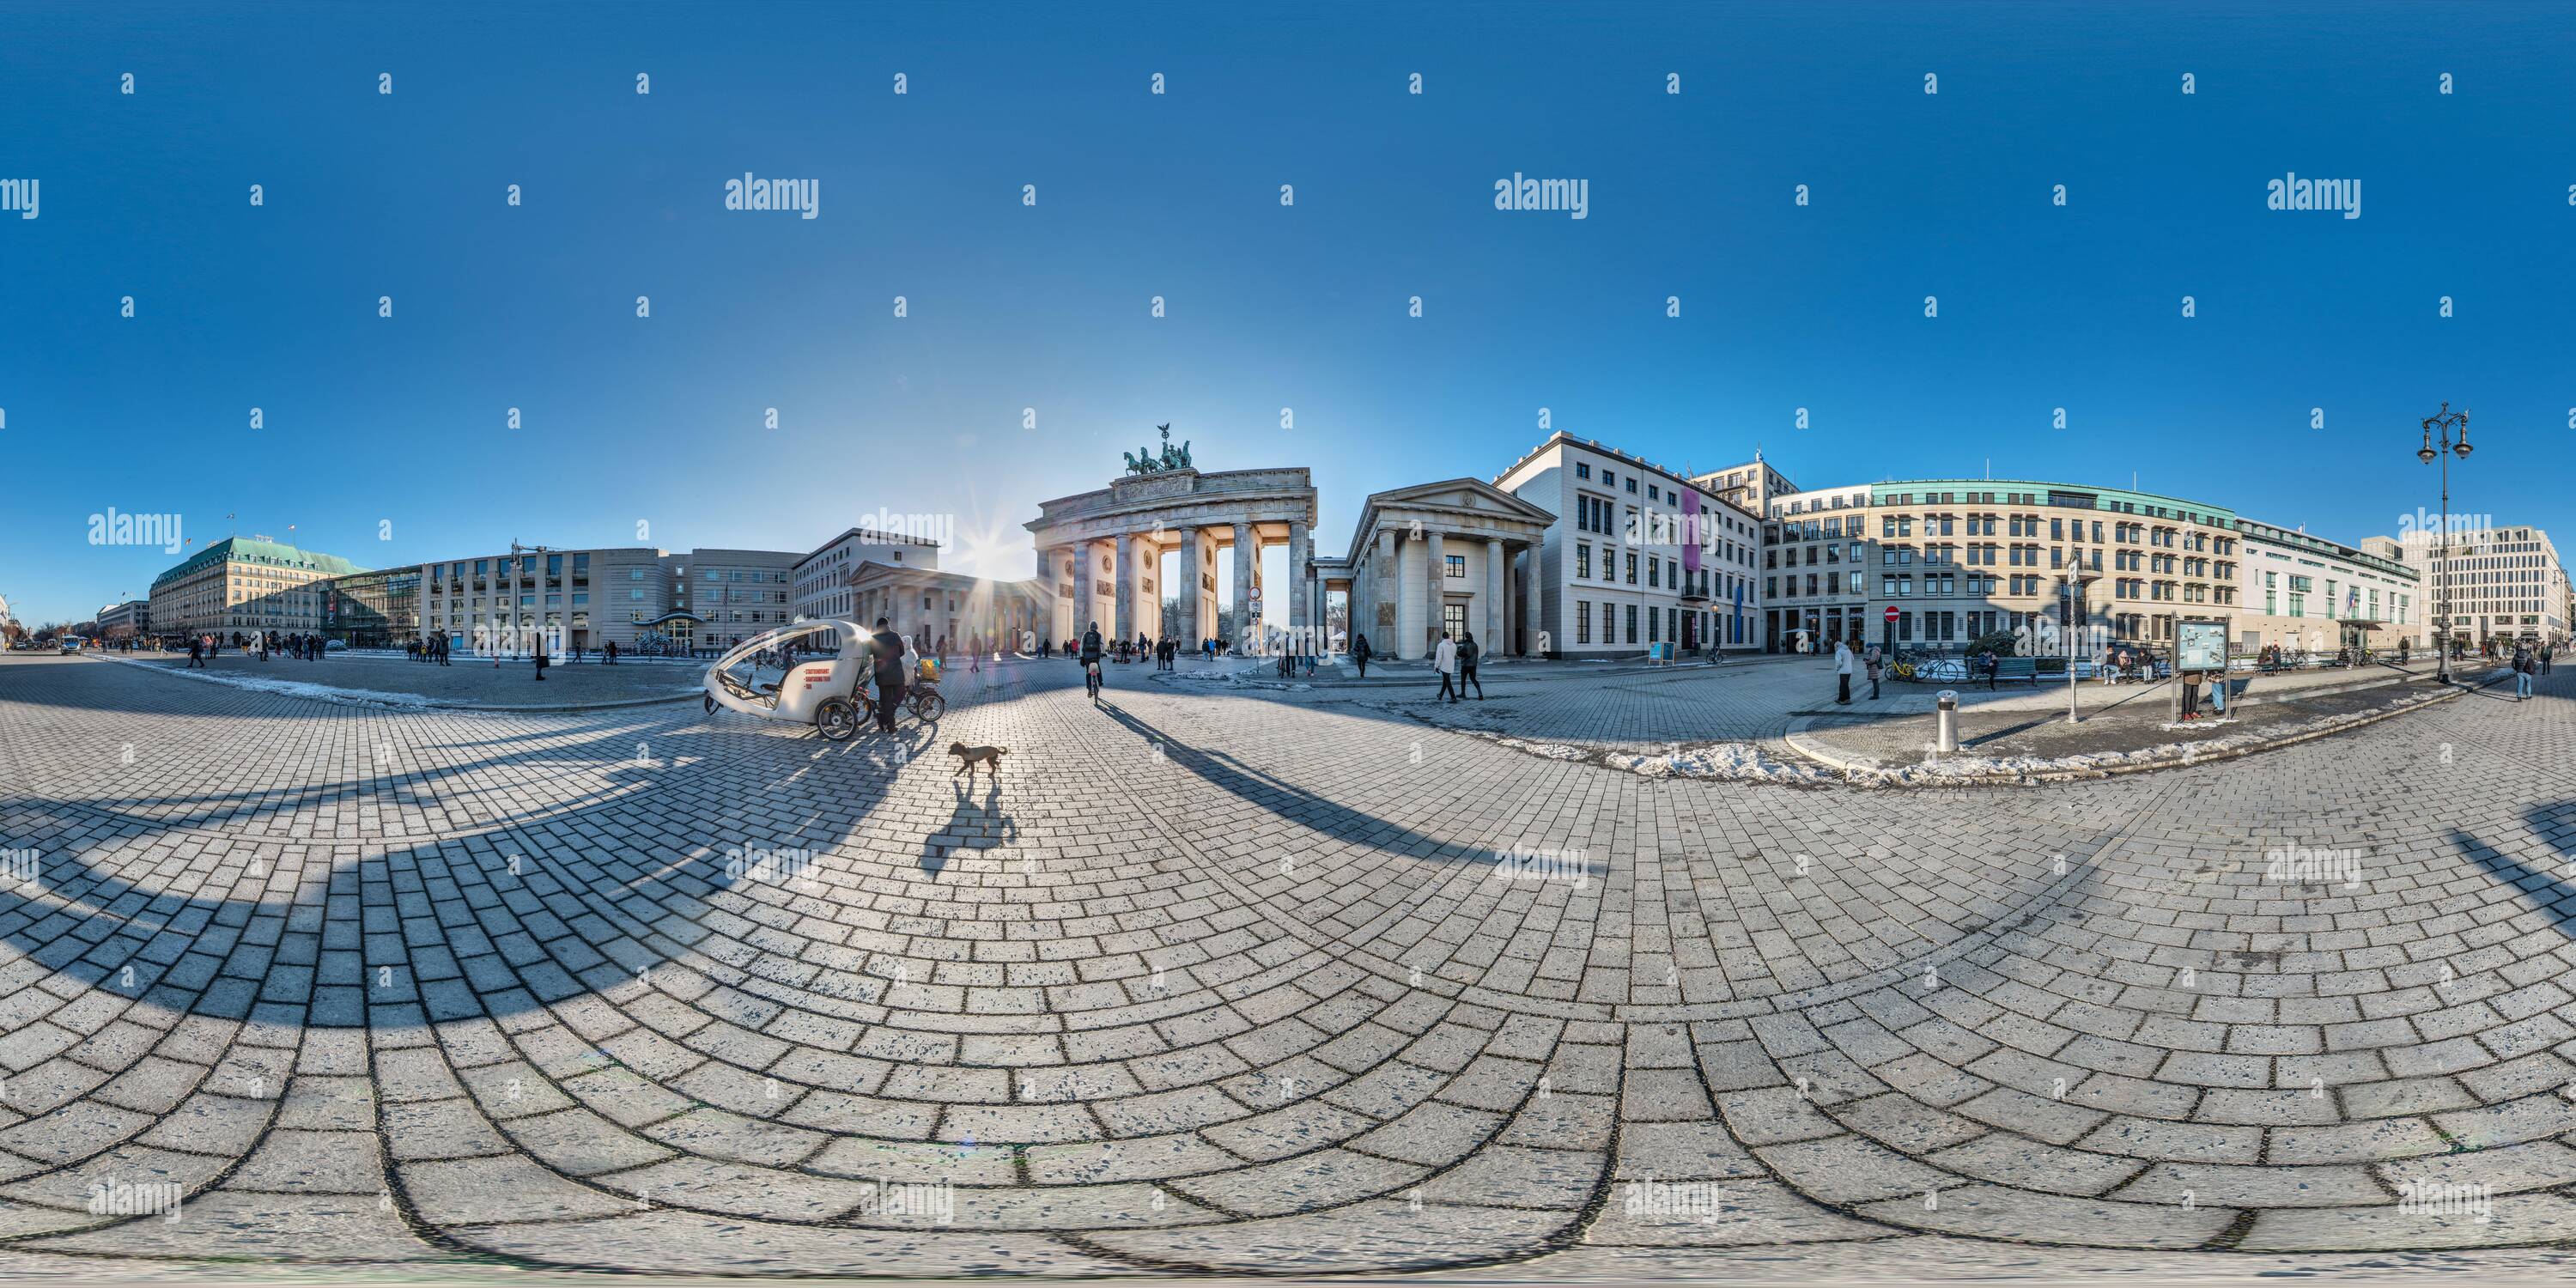 360 degree panoramic view of 360° panoramic photograph taken on the Pariser Platz in Berlin with the US Embassy, French Embassy, Hotel Adlon and the Akademie der Künste.